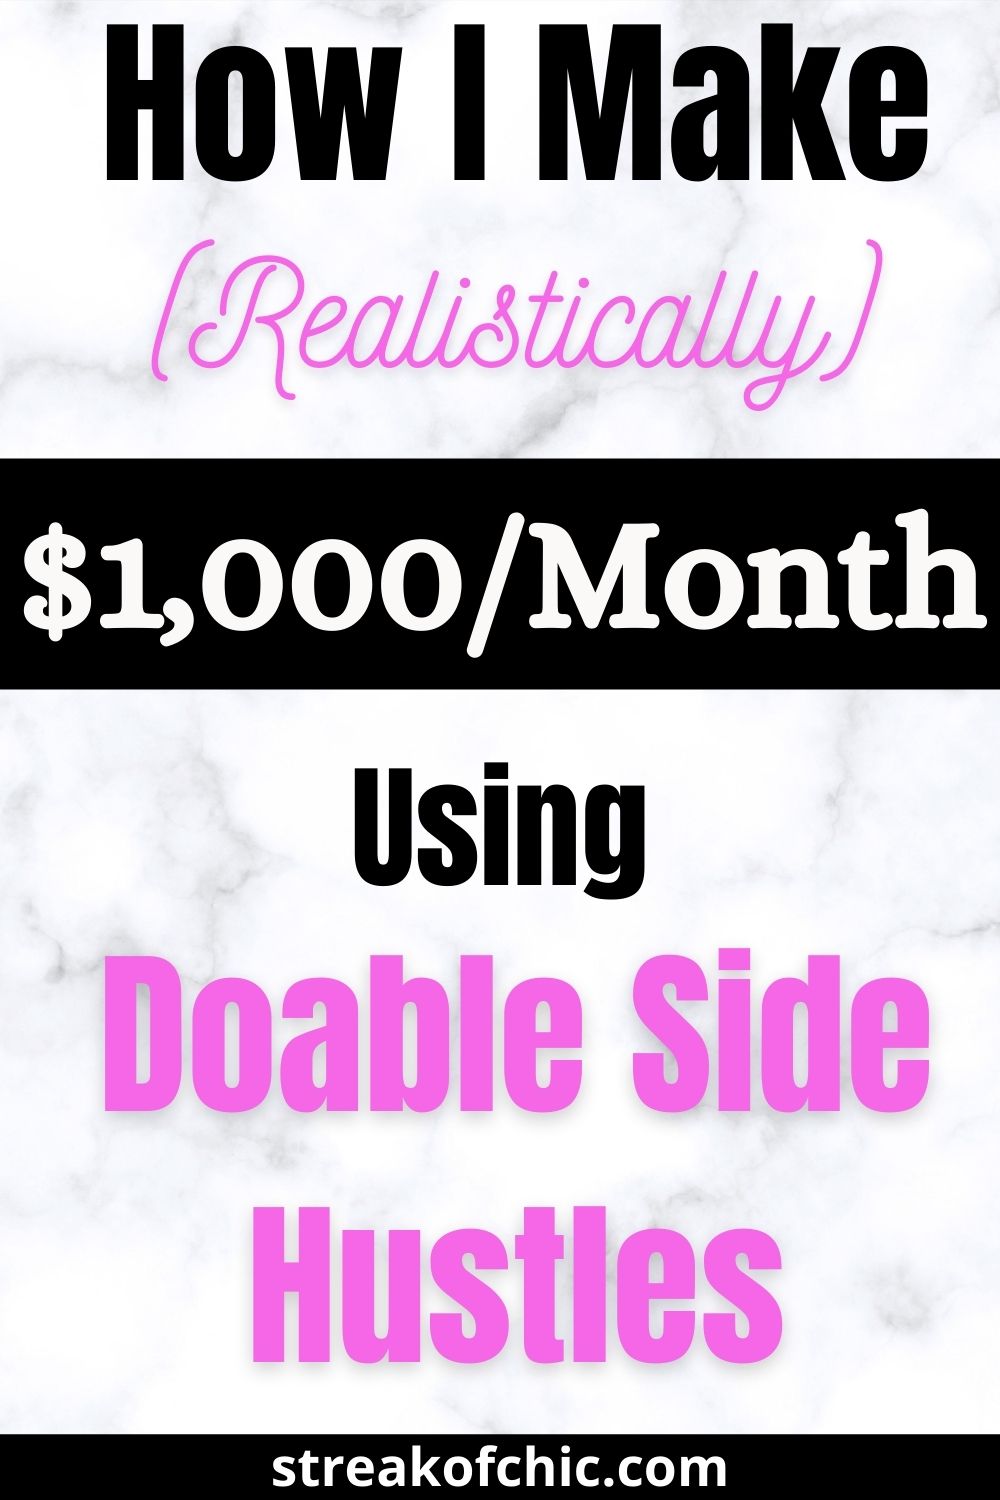 5 Realistic Side Hustle Ideas That Make Me an Extra 1,000/Month